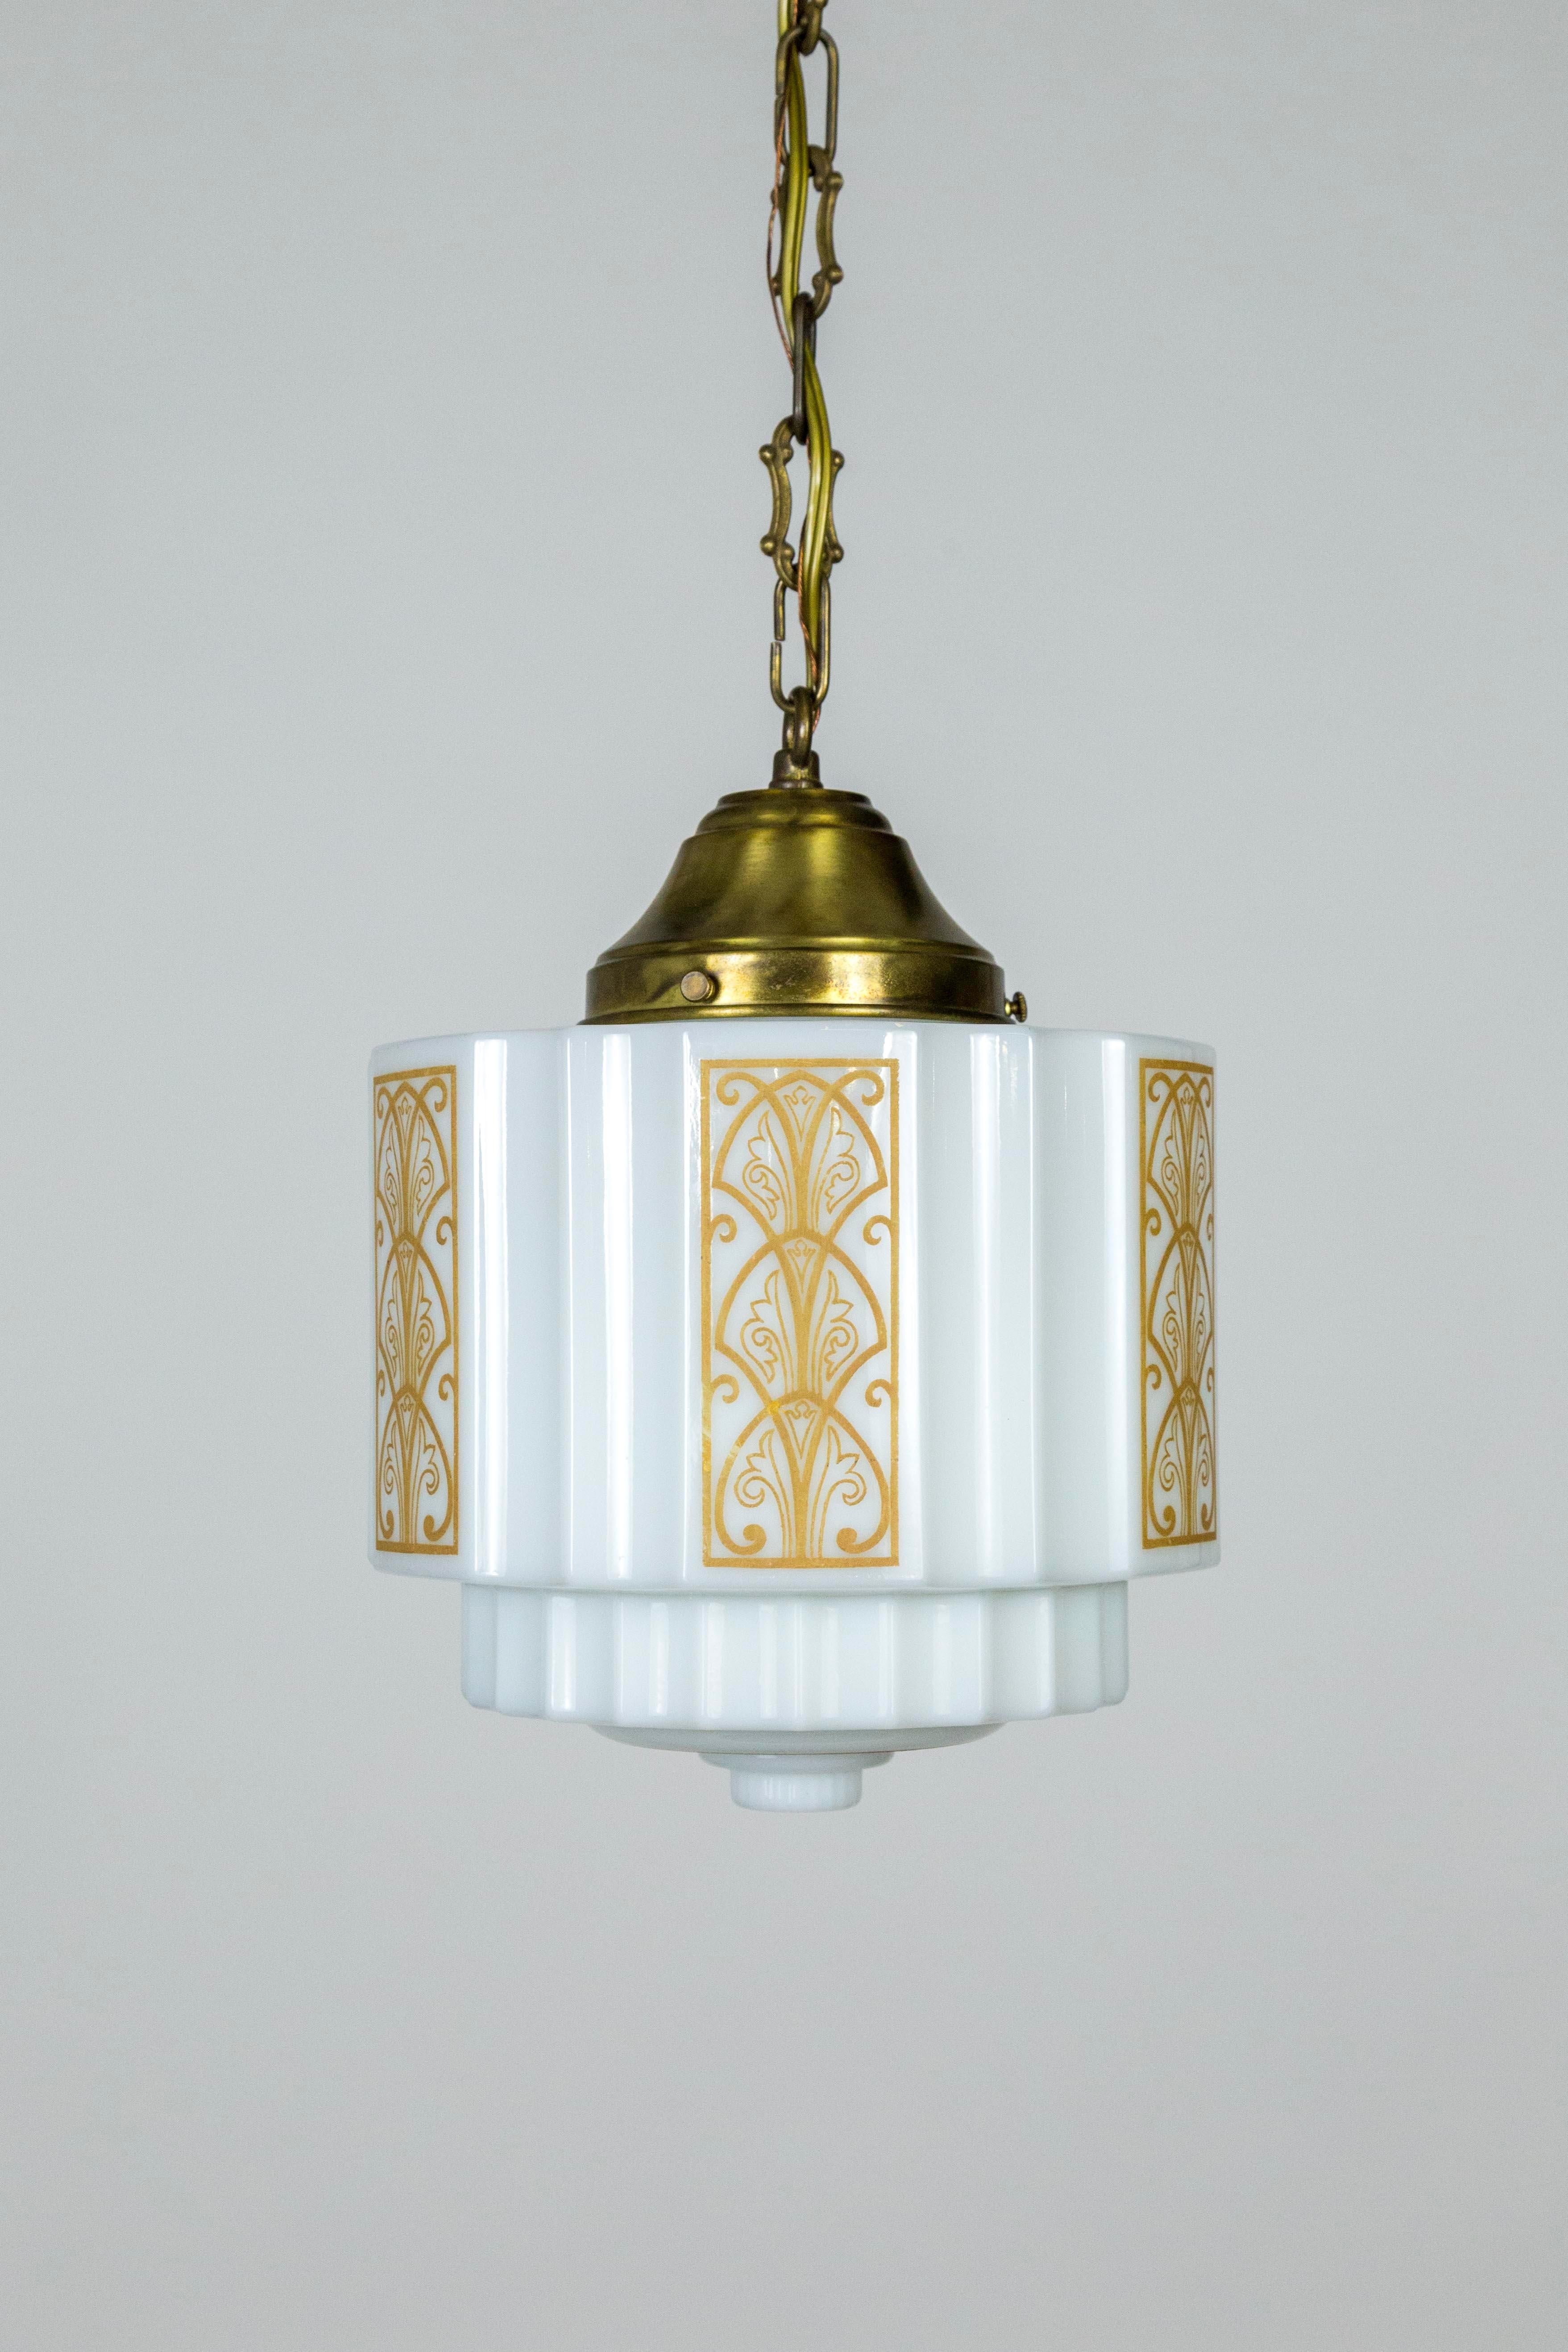 An Art Deco pendant with ridged, molded white glass in a stepped, cylinder shape, painted with sienna colored decorations; with a decorative, brass chain and lovely, copper toned canopy, 1920s. Measures: 8